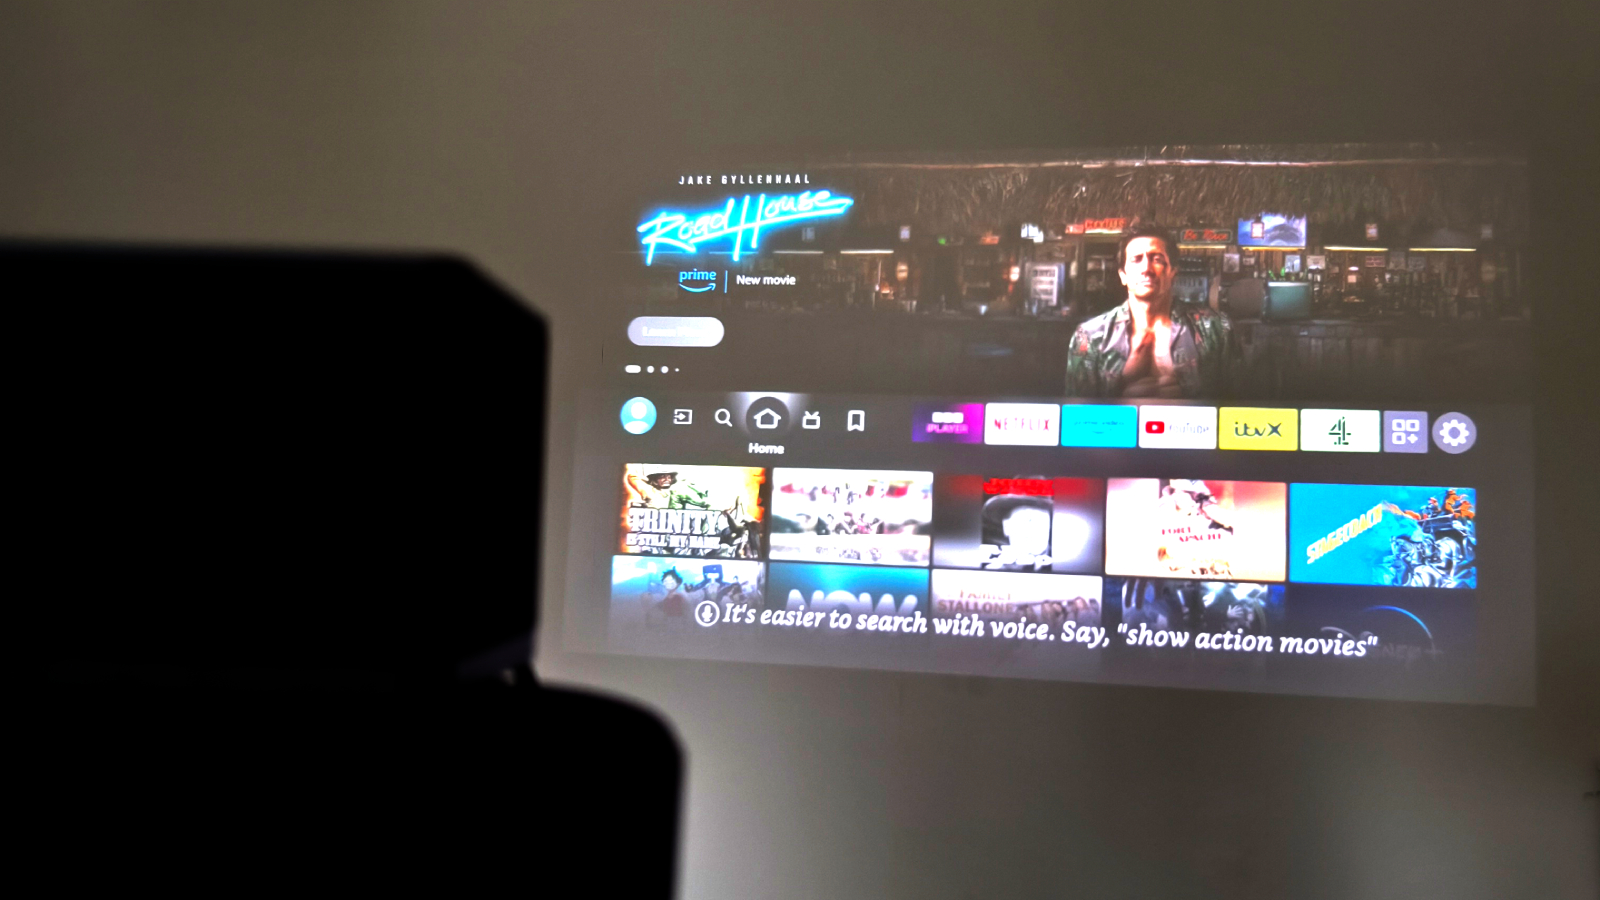 Fire TV being projected with a Fire TV Cube in the foreground.